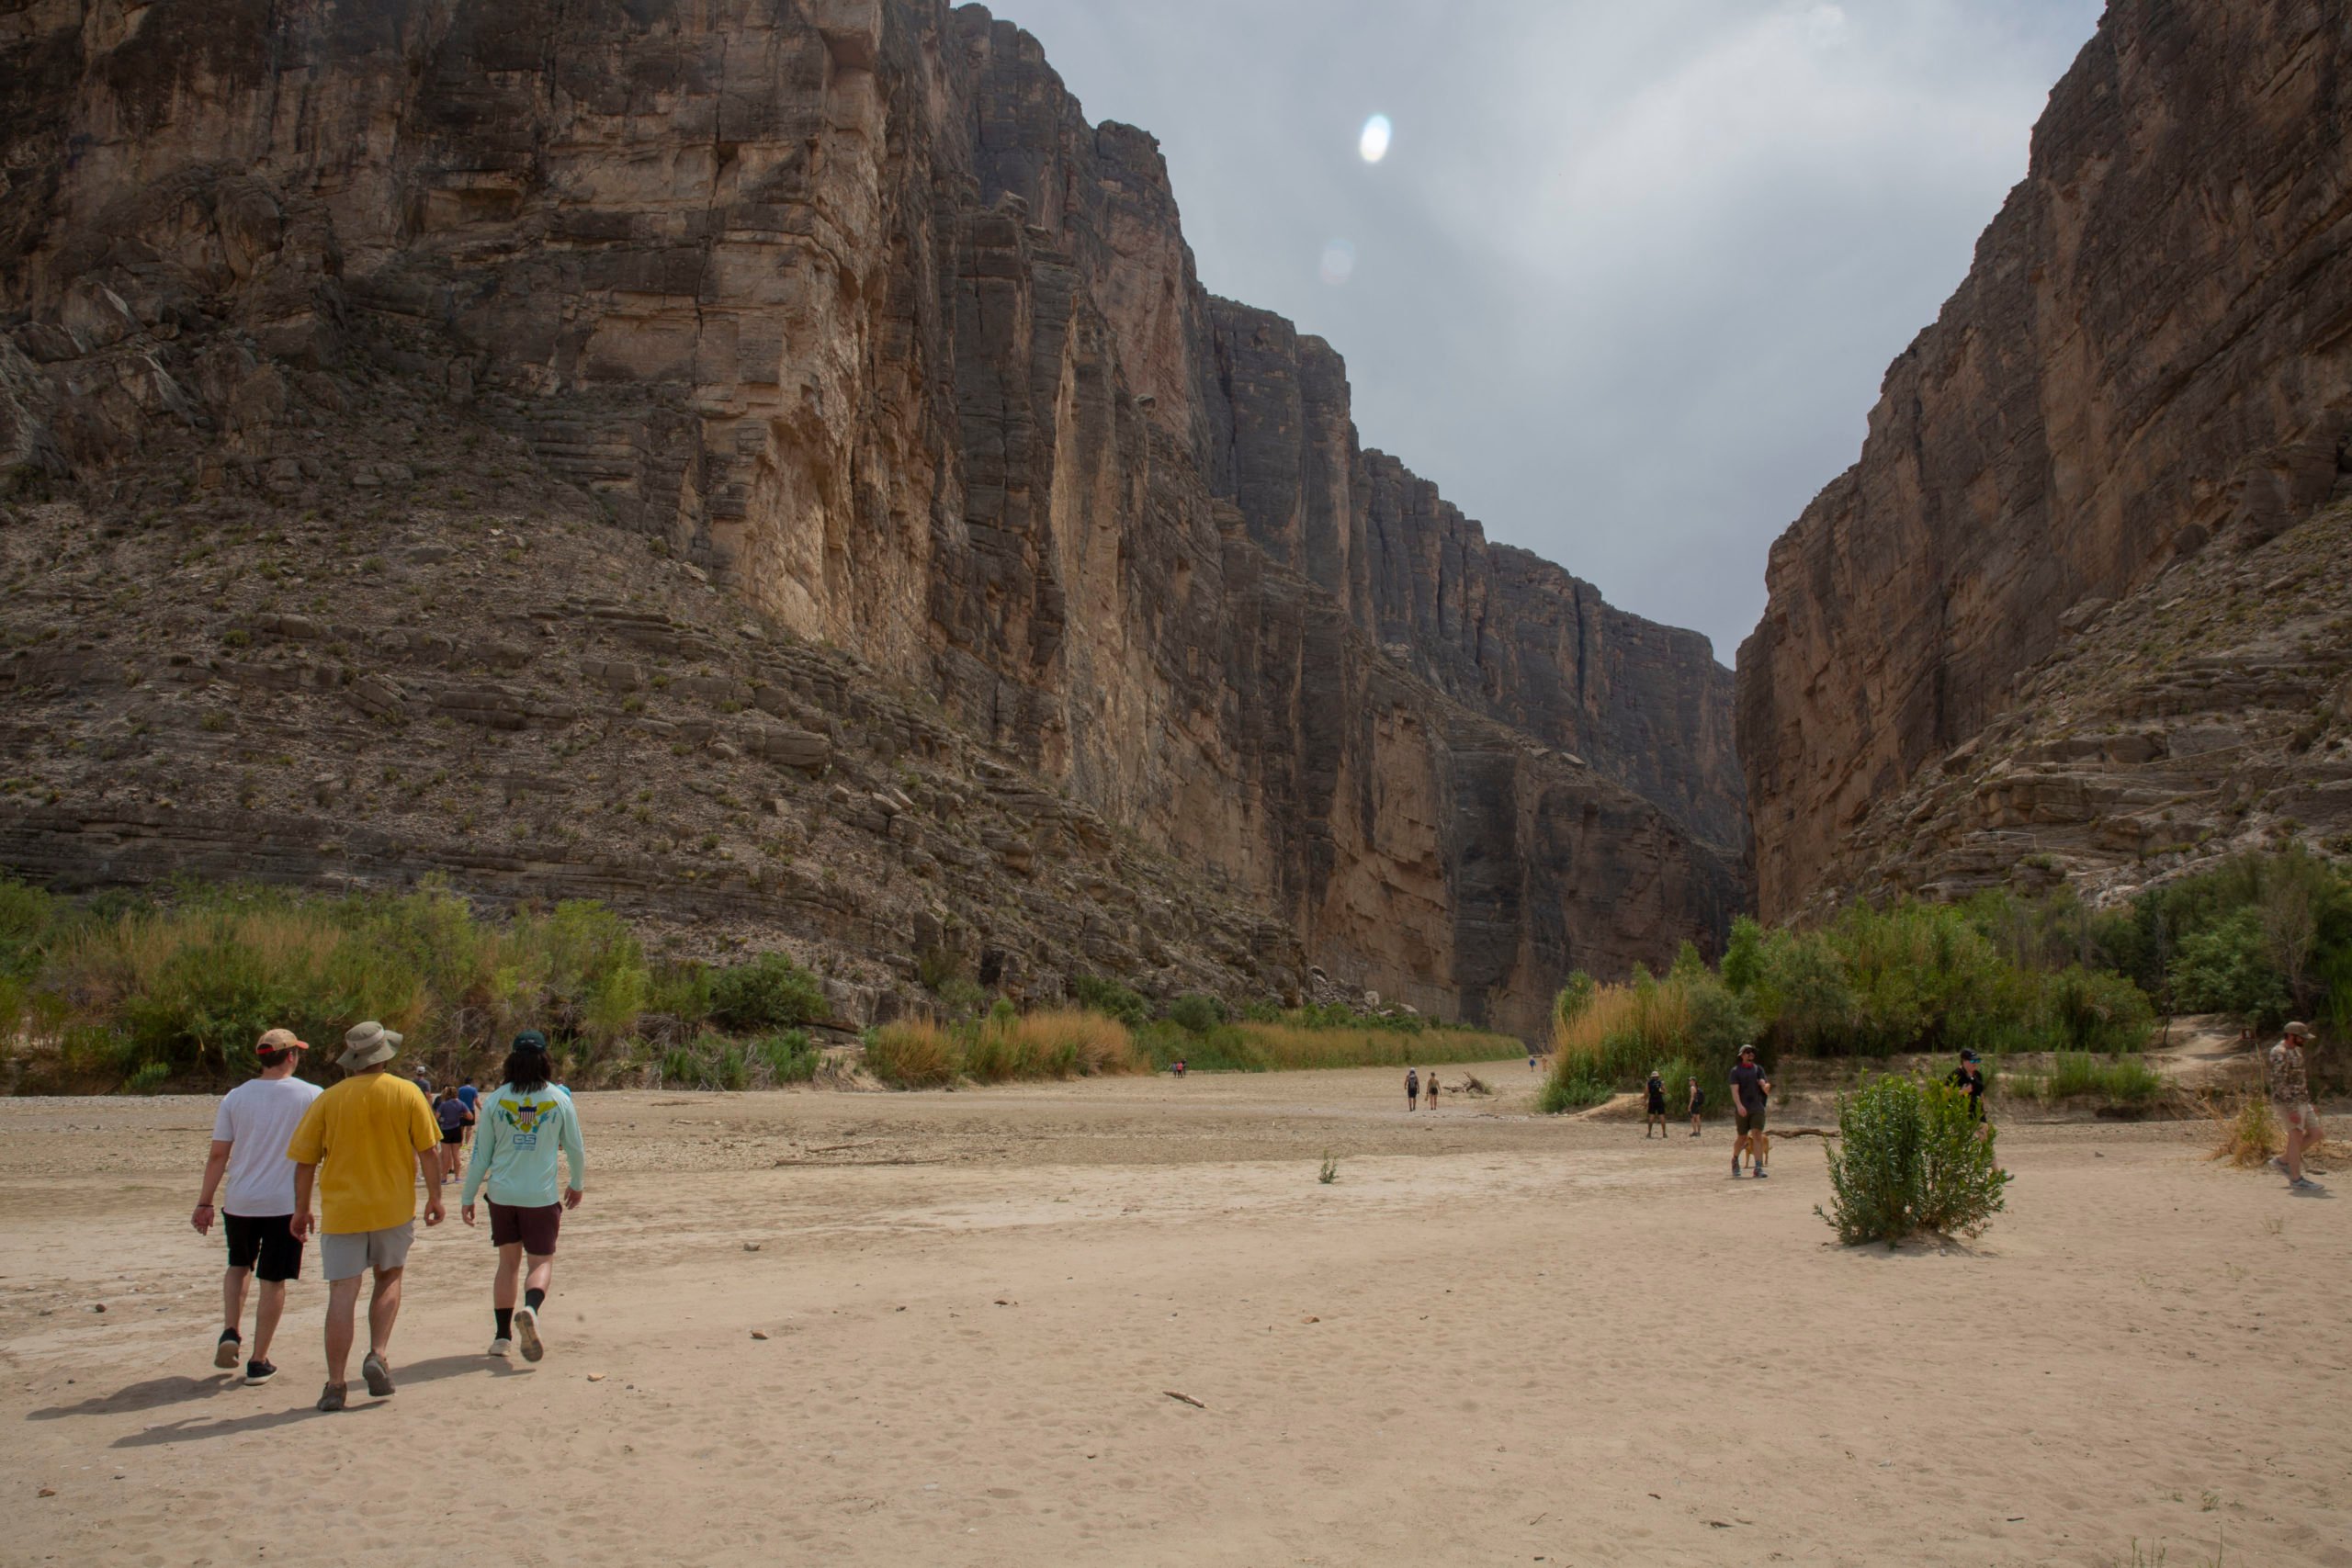 A trio of tourists gaze upon the empty river bed of the Rio Grande, which normally runs through the tall canyon walls seen here.